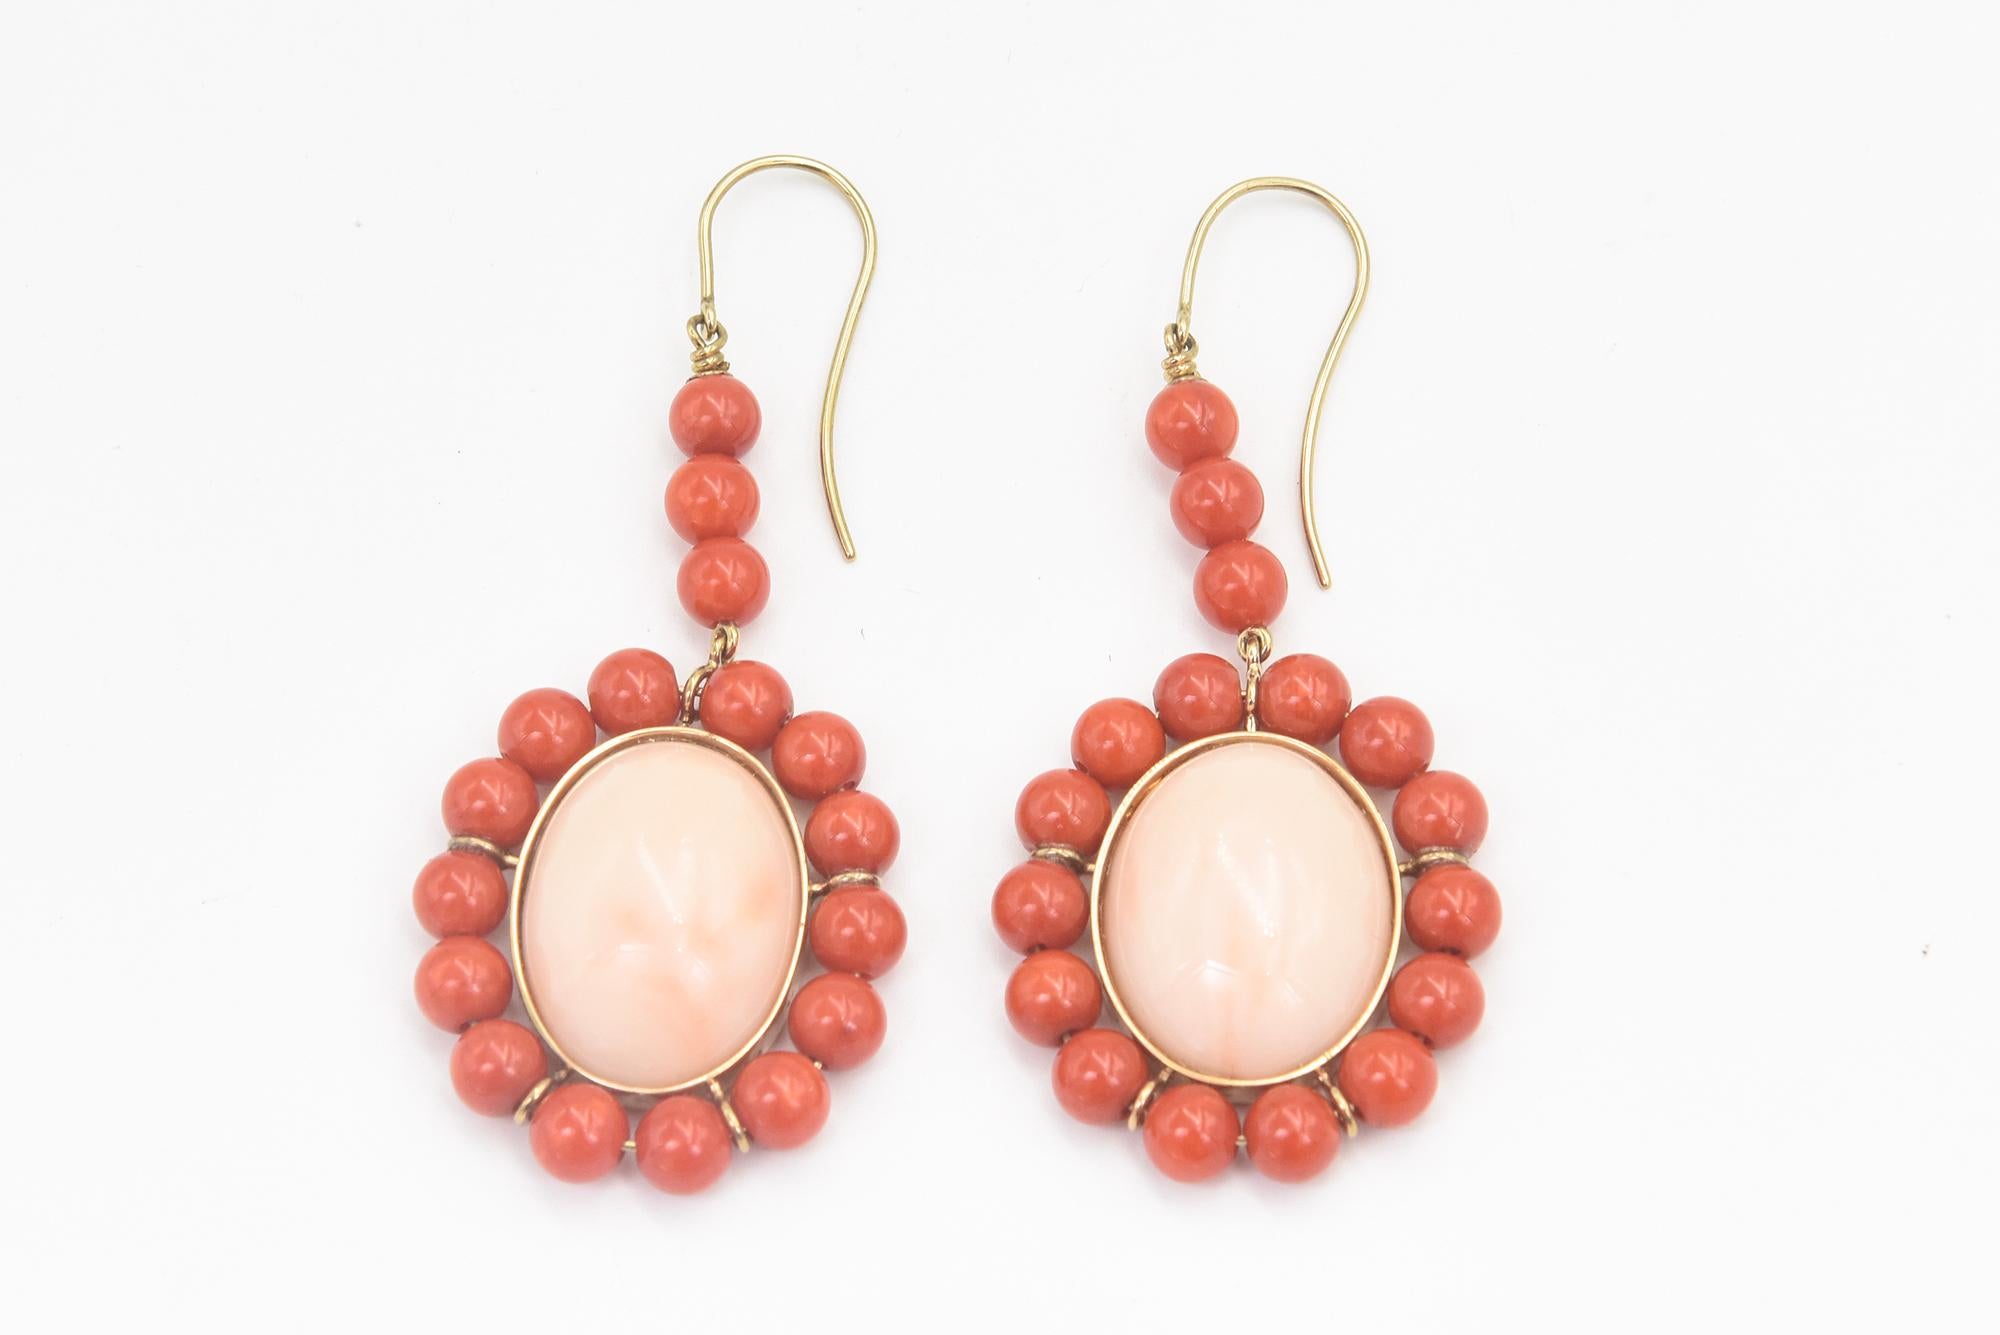 Coral Dangling Drop Gold Earrings In Good Condition For Sale In Miami Beach, FL